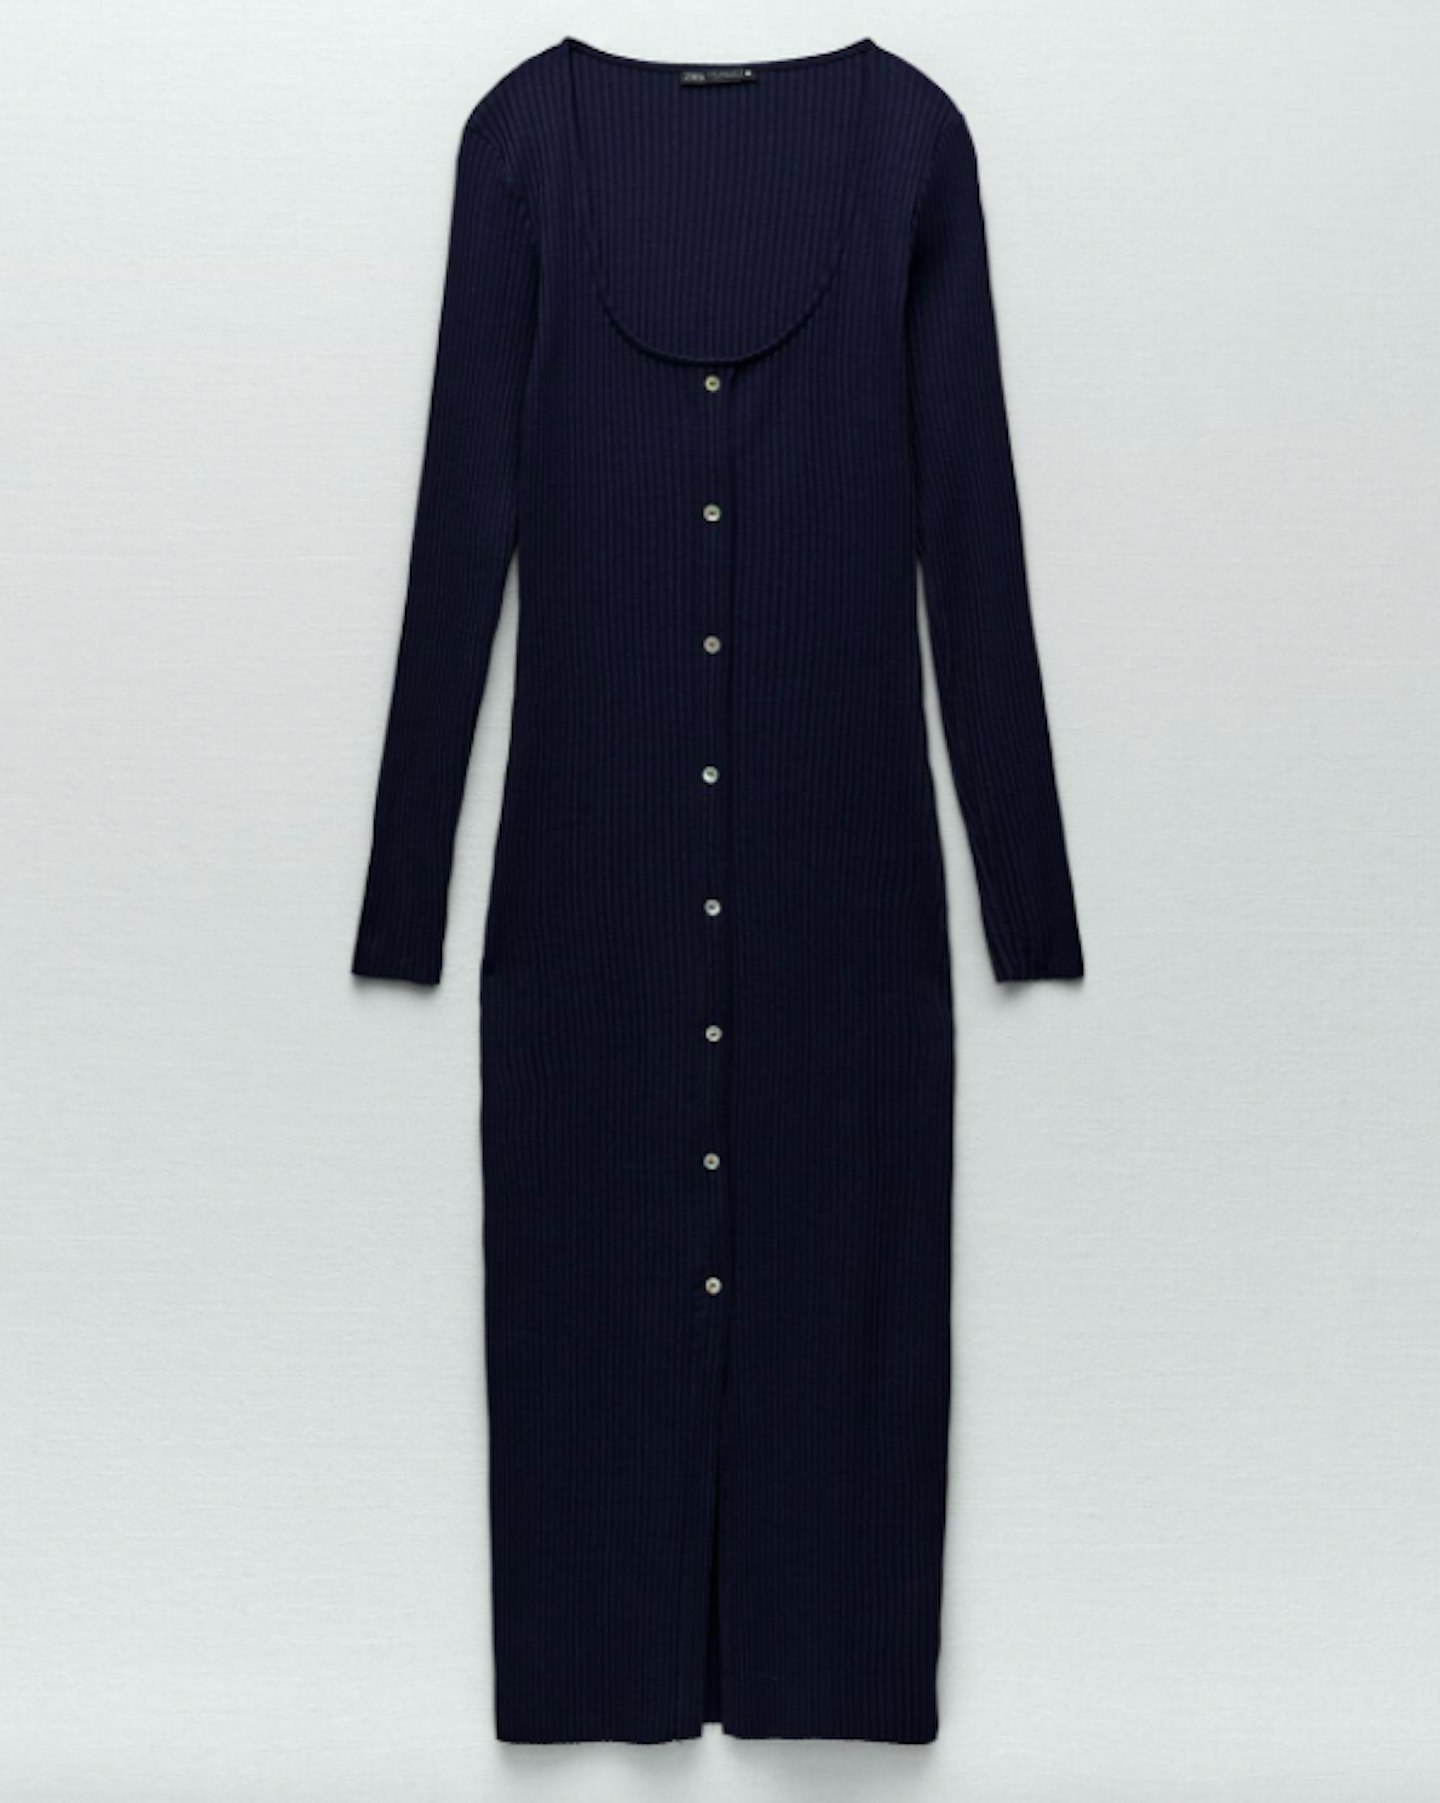 Zara, Ribbed Dress With Buttons, £19.99